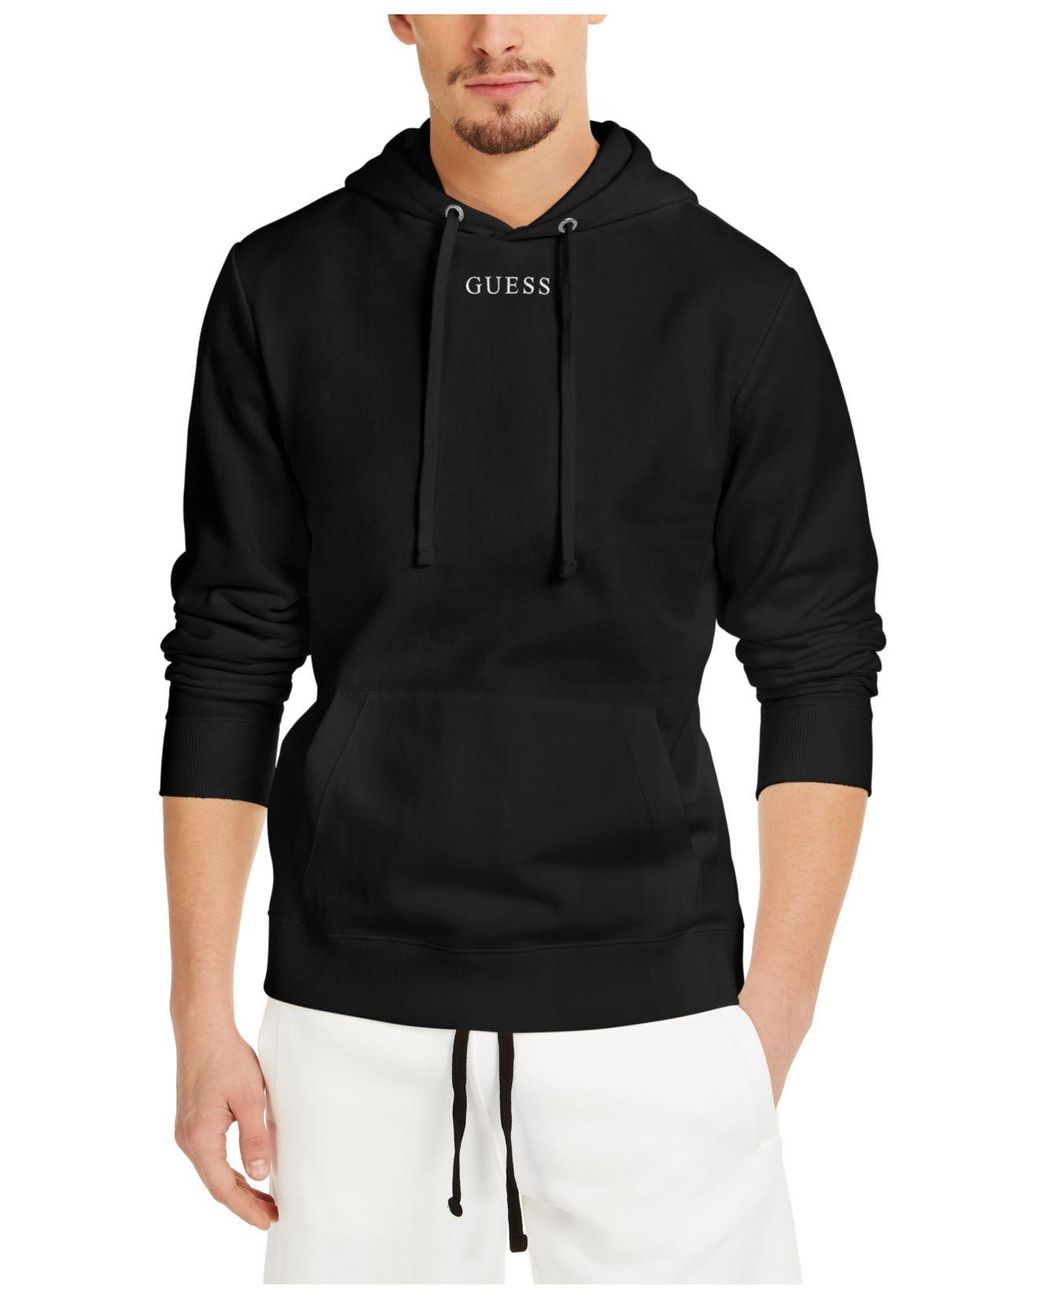 Guess Cotton Eco Roy Hoodie in Black for Men - Lyst